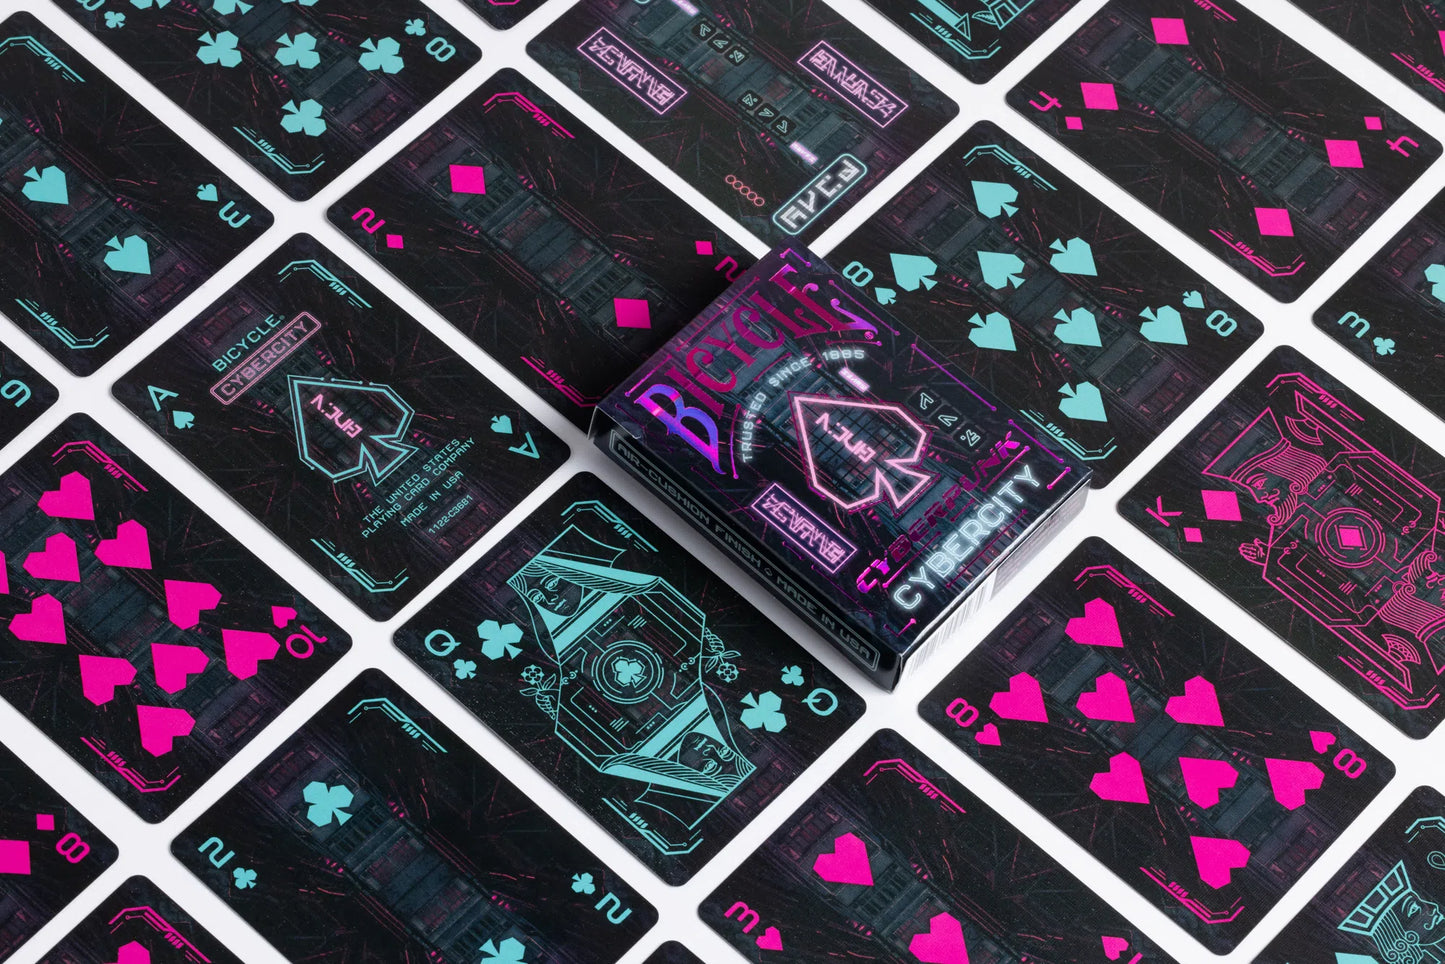 Bicycle: Cyberpunk Cybercity Playing Cards